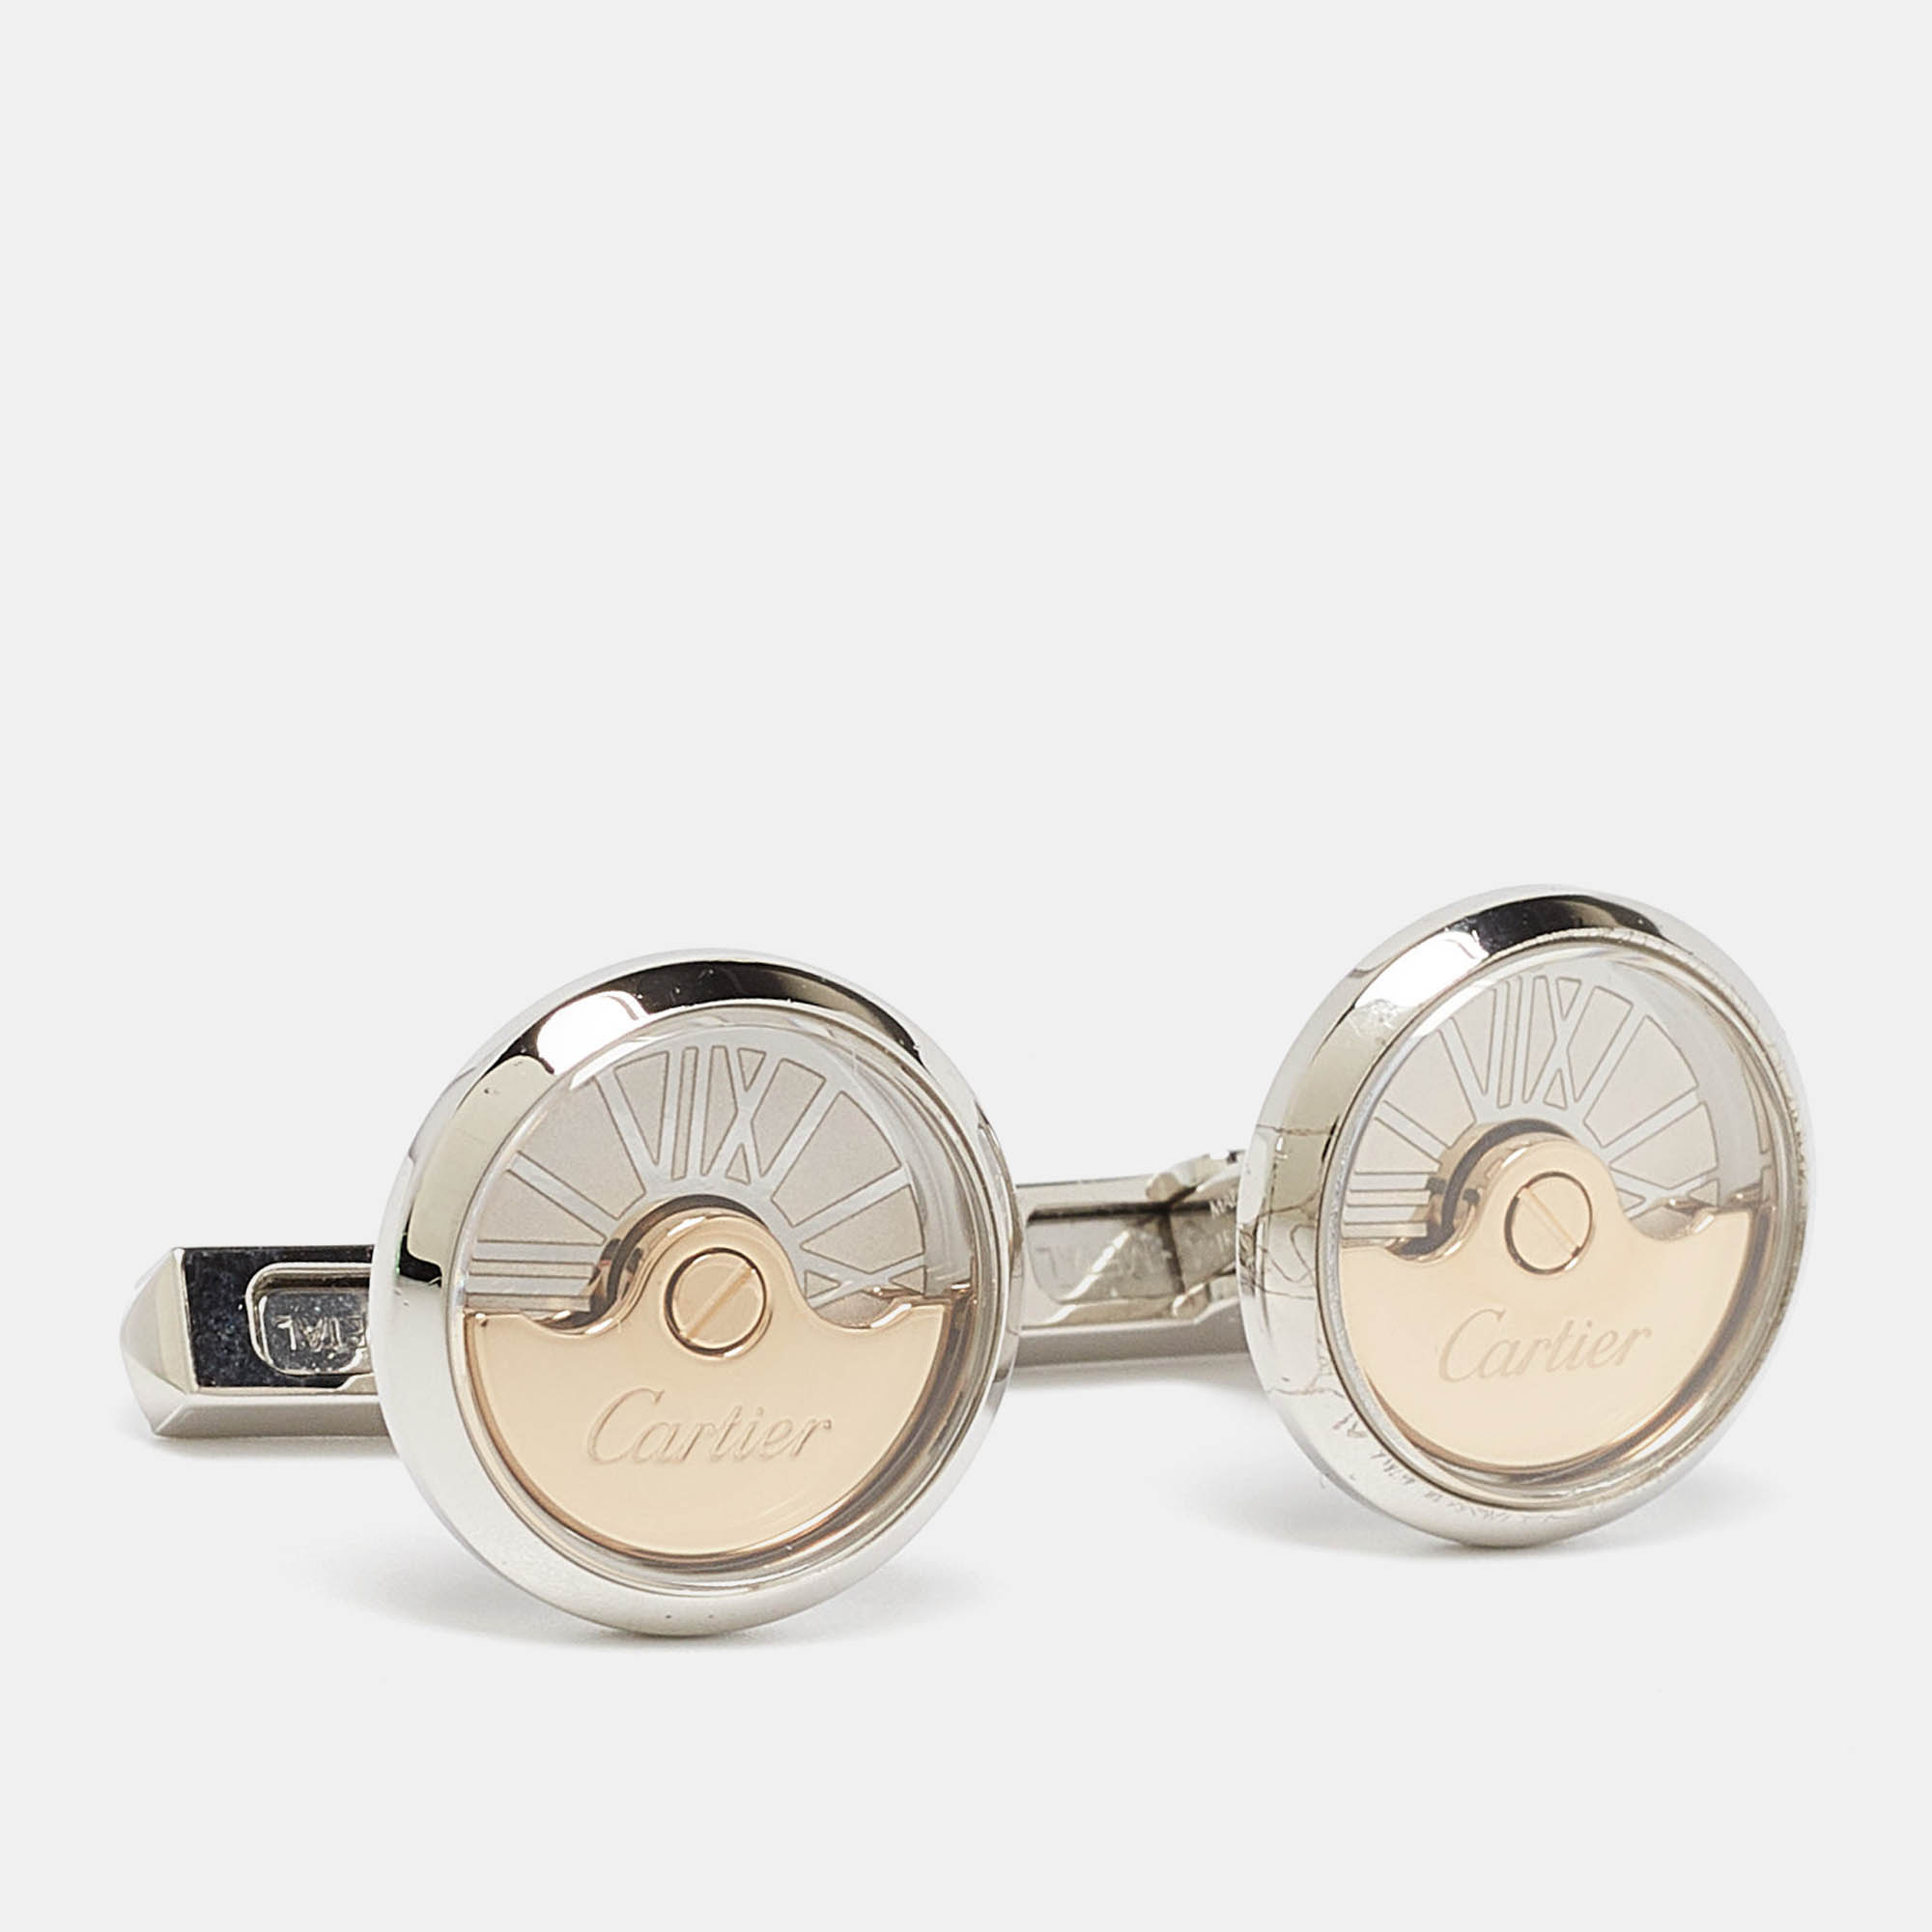 

Cartier Oscillating Weight Two Tone Sterling Silver Cufflinks